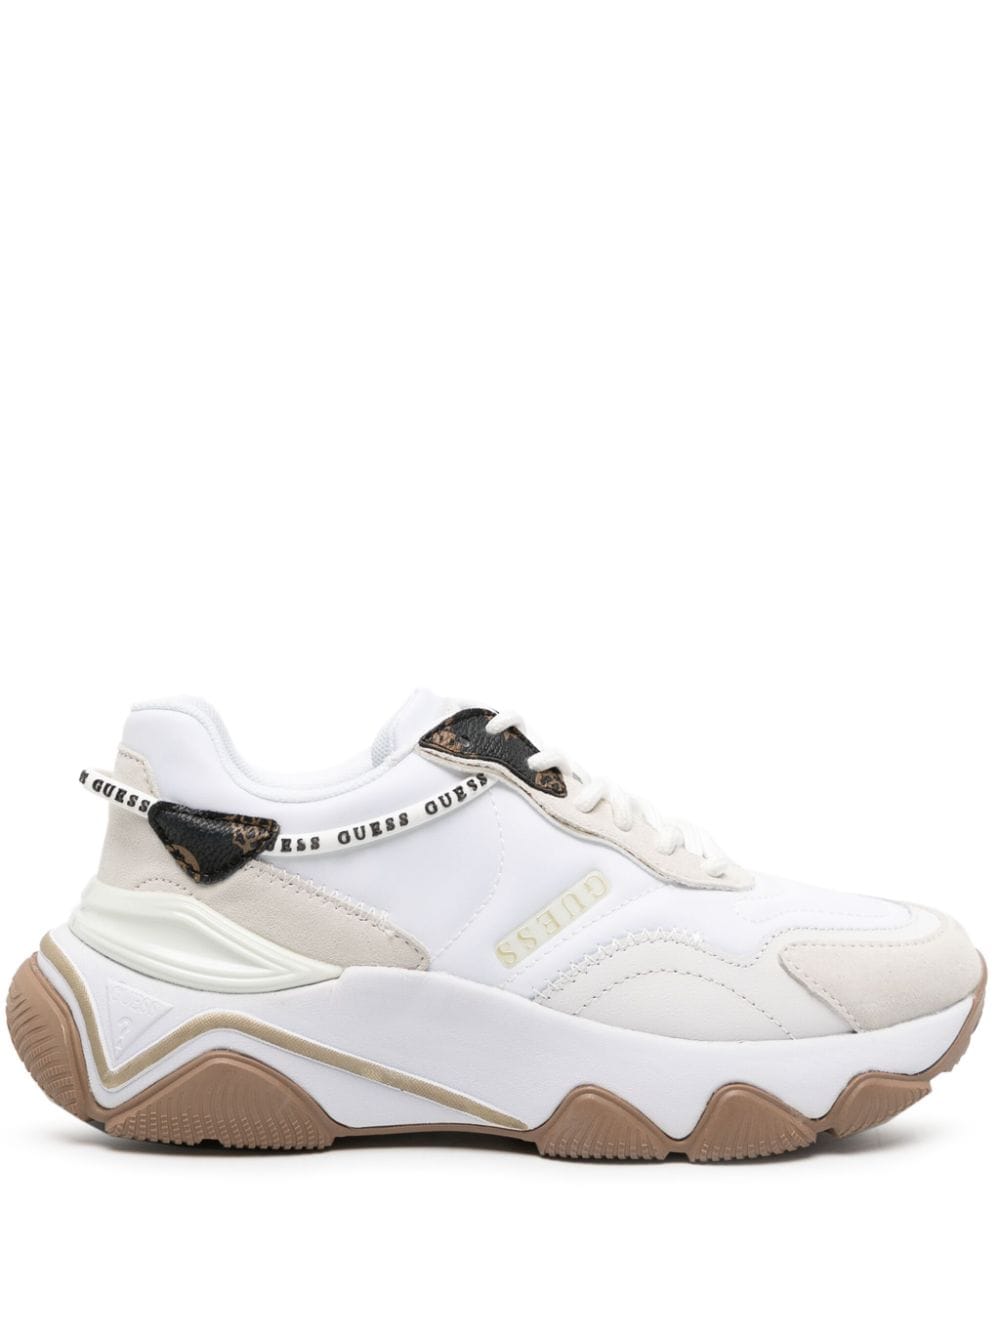 Guess Usa Micola Active Chunky Sneakers In White